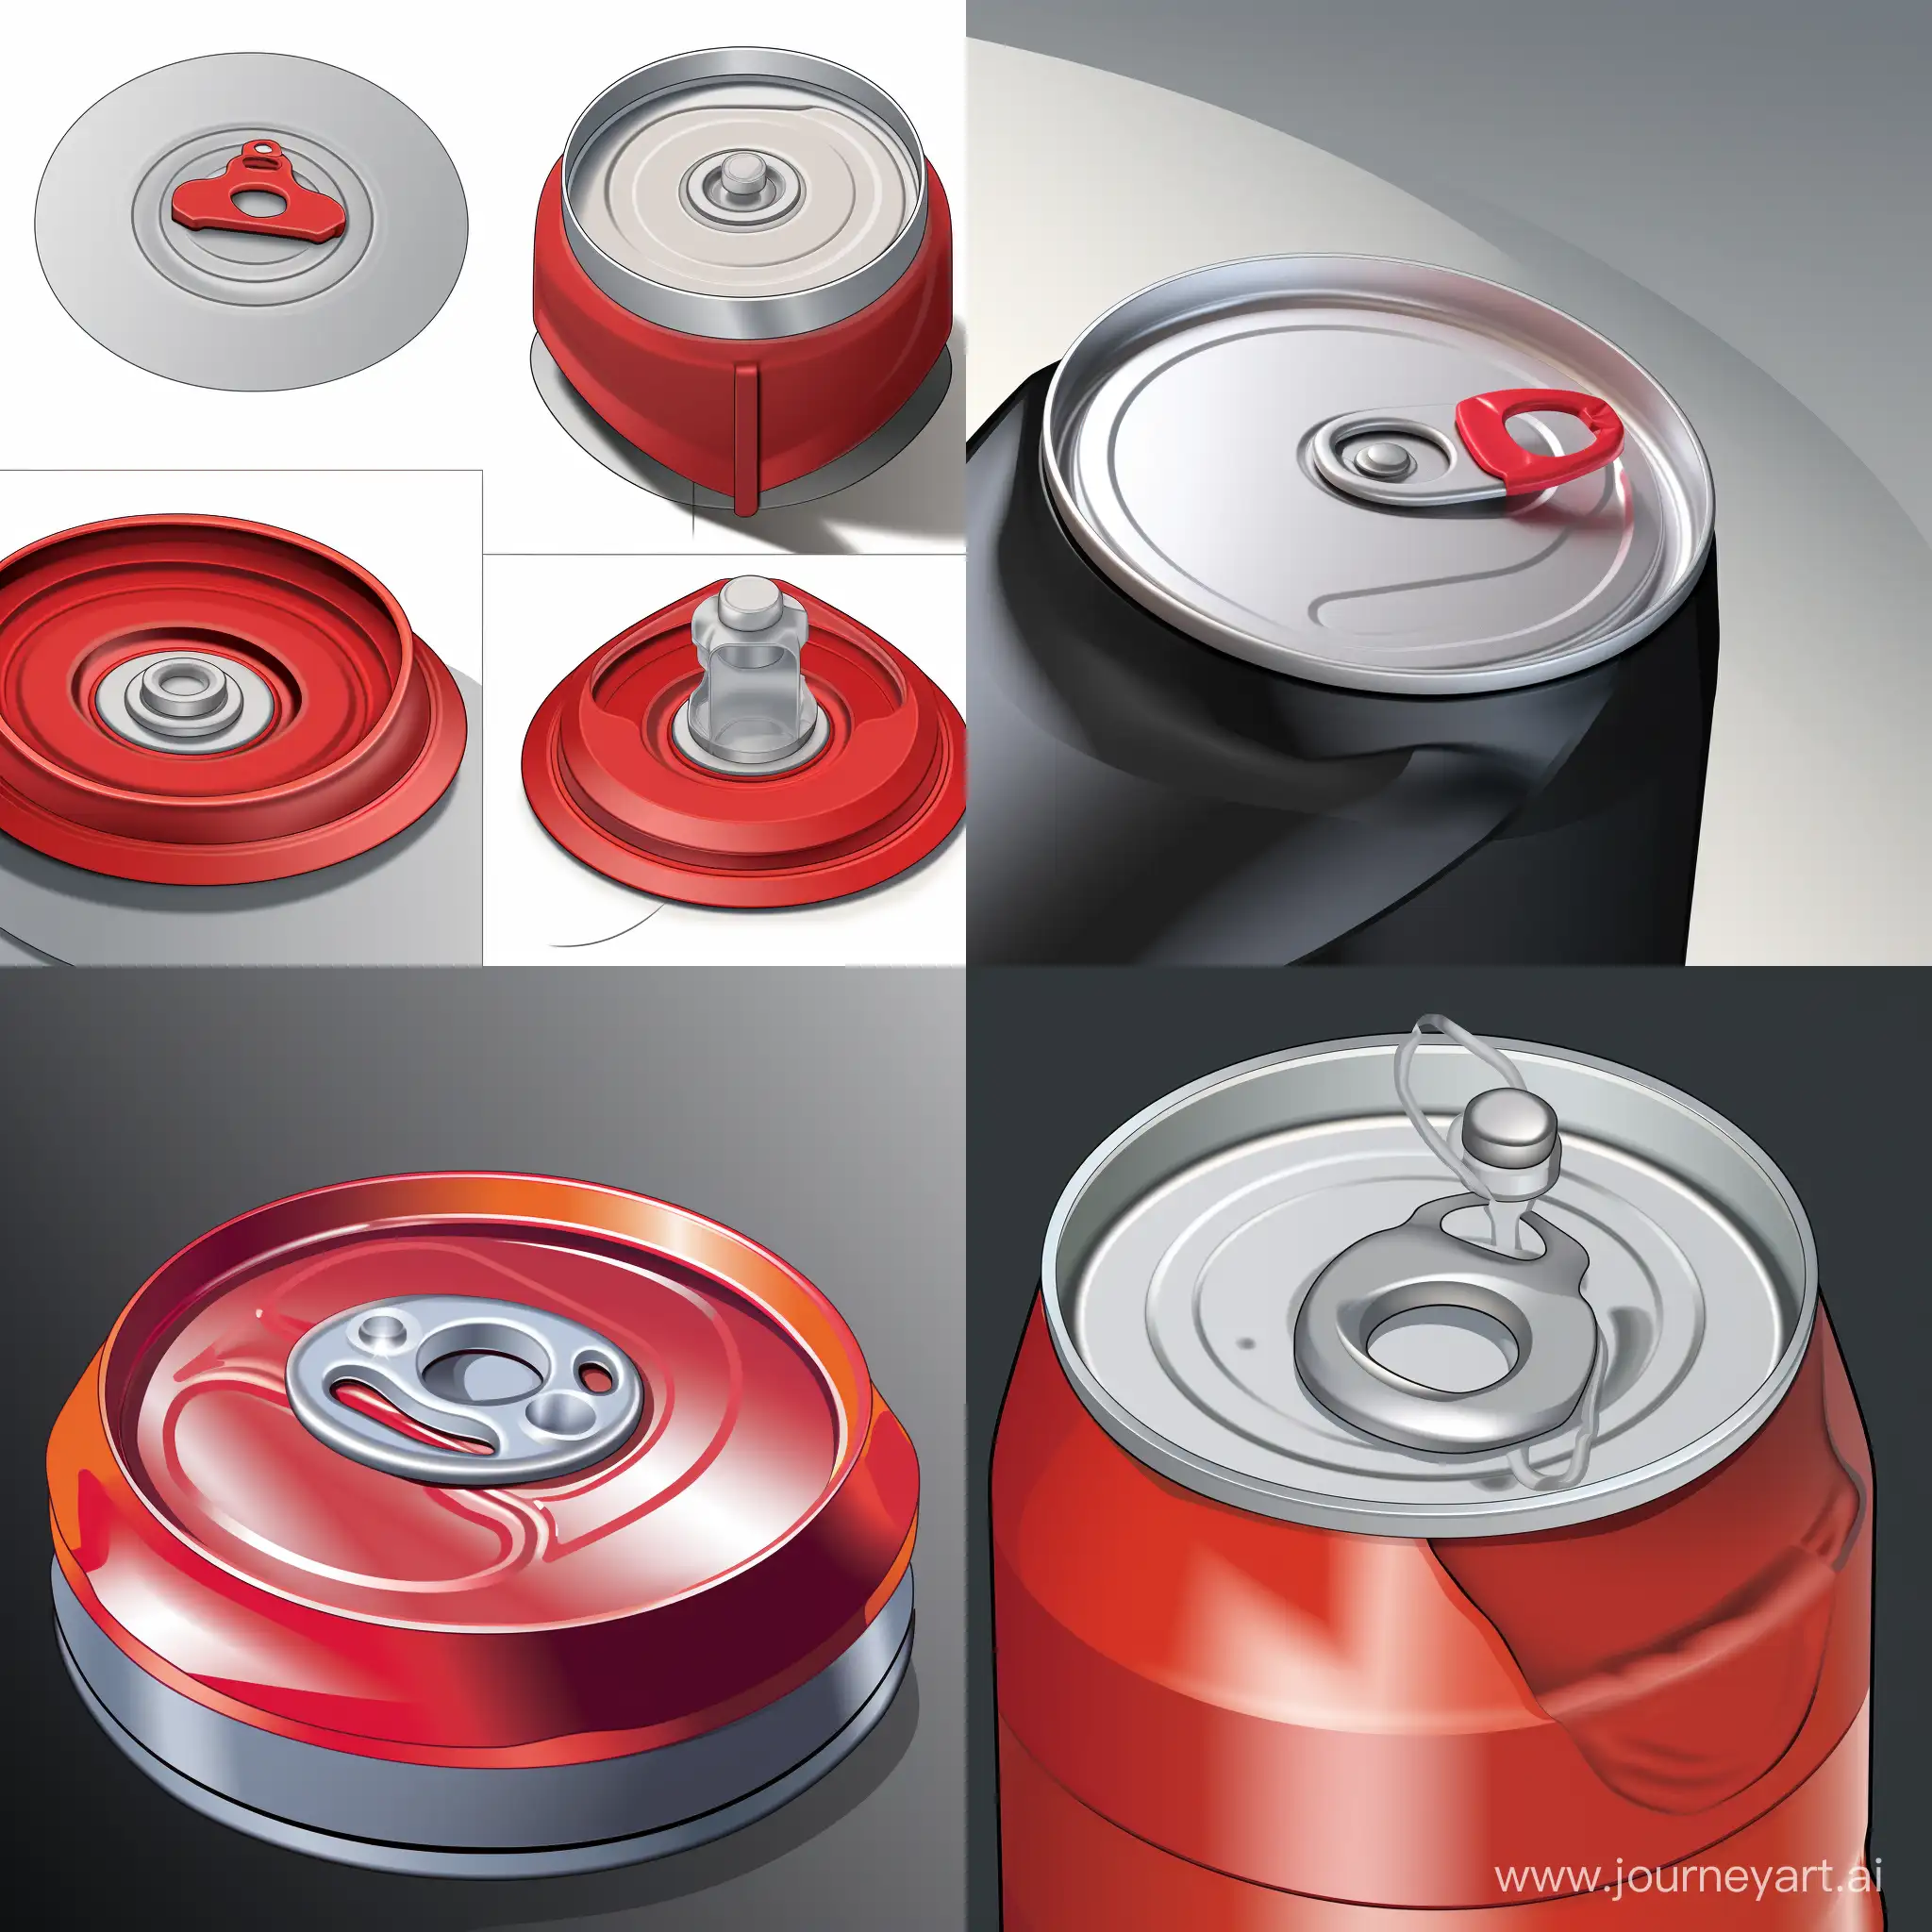 Innovative-Aluminum-Can-Design-with-Reclosing-Valve-and-Red-Silicone-Button